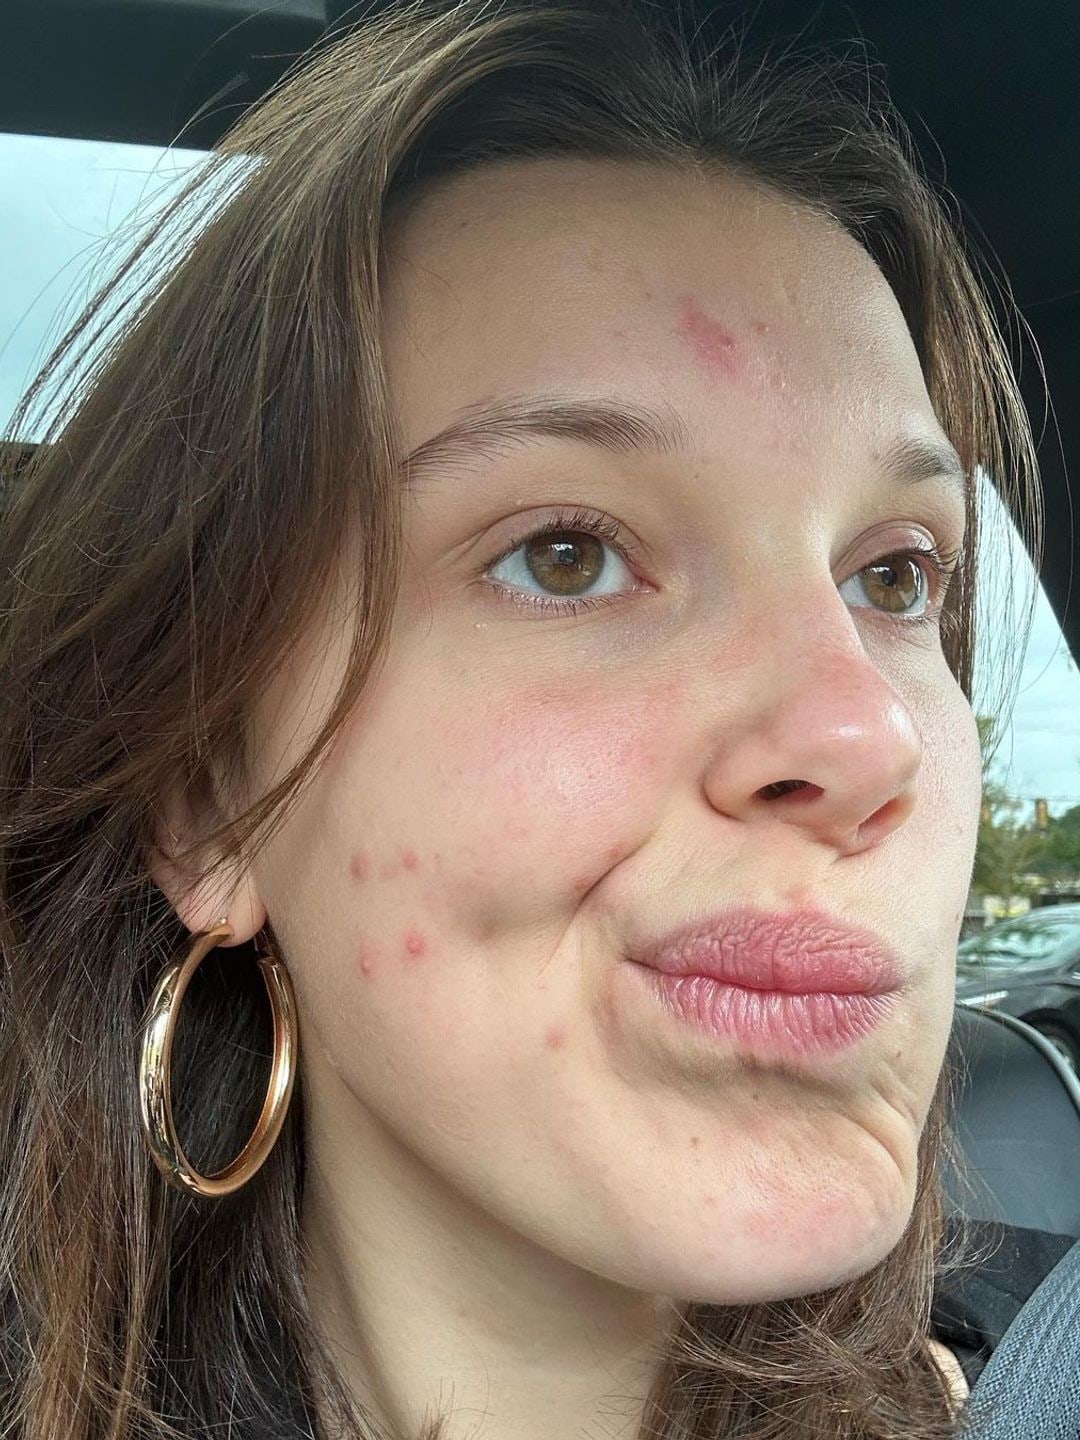 Millie shared the refreshingly candid post on her Instagram